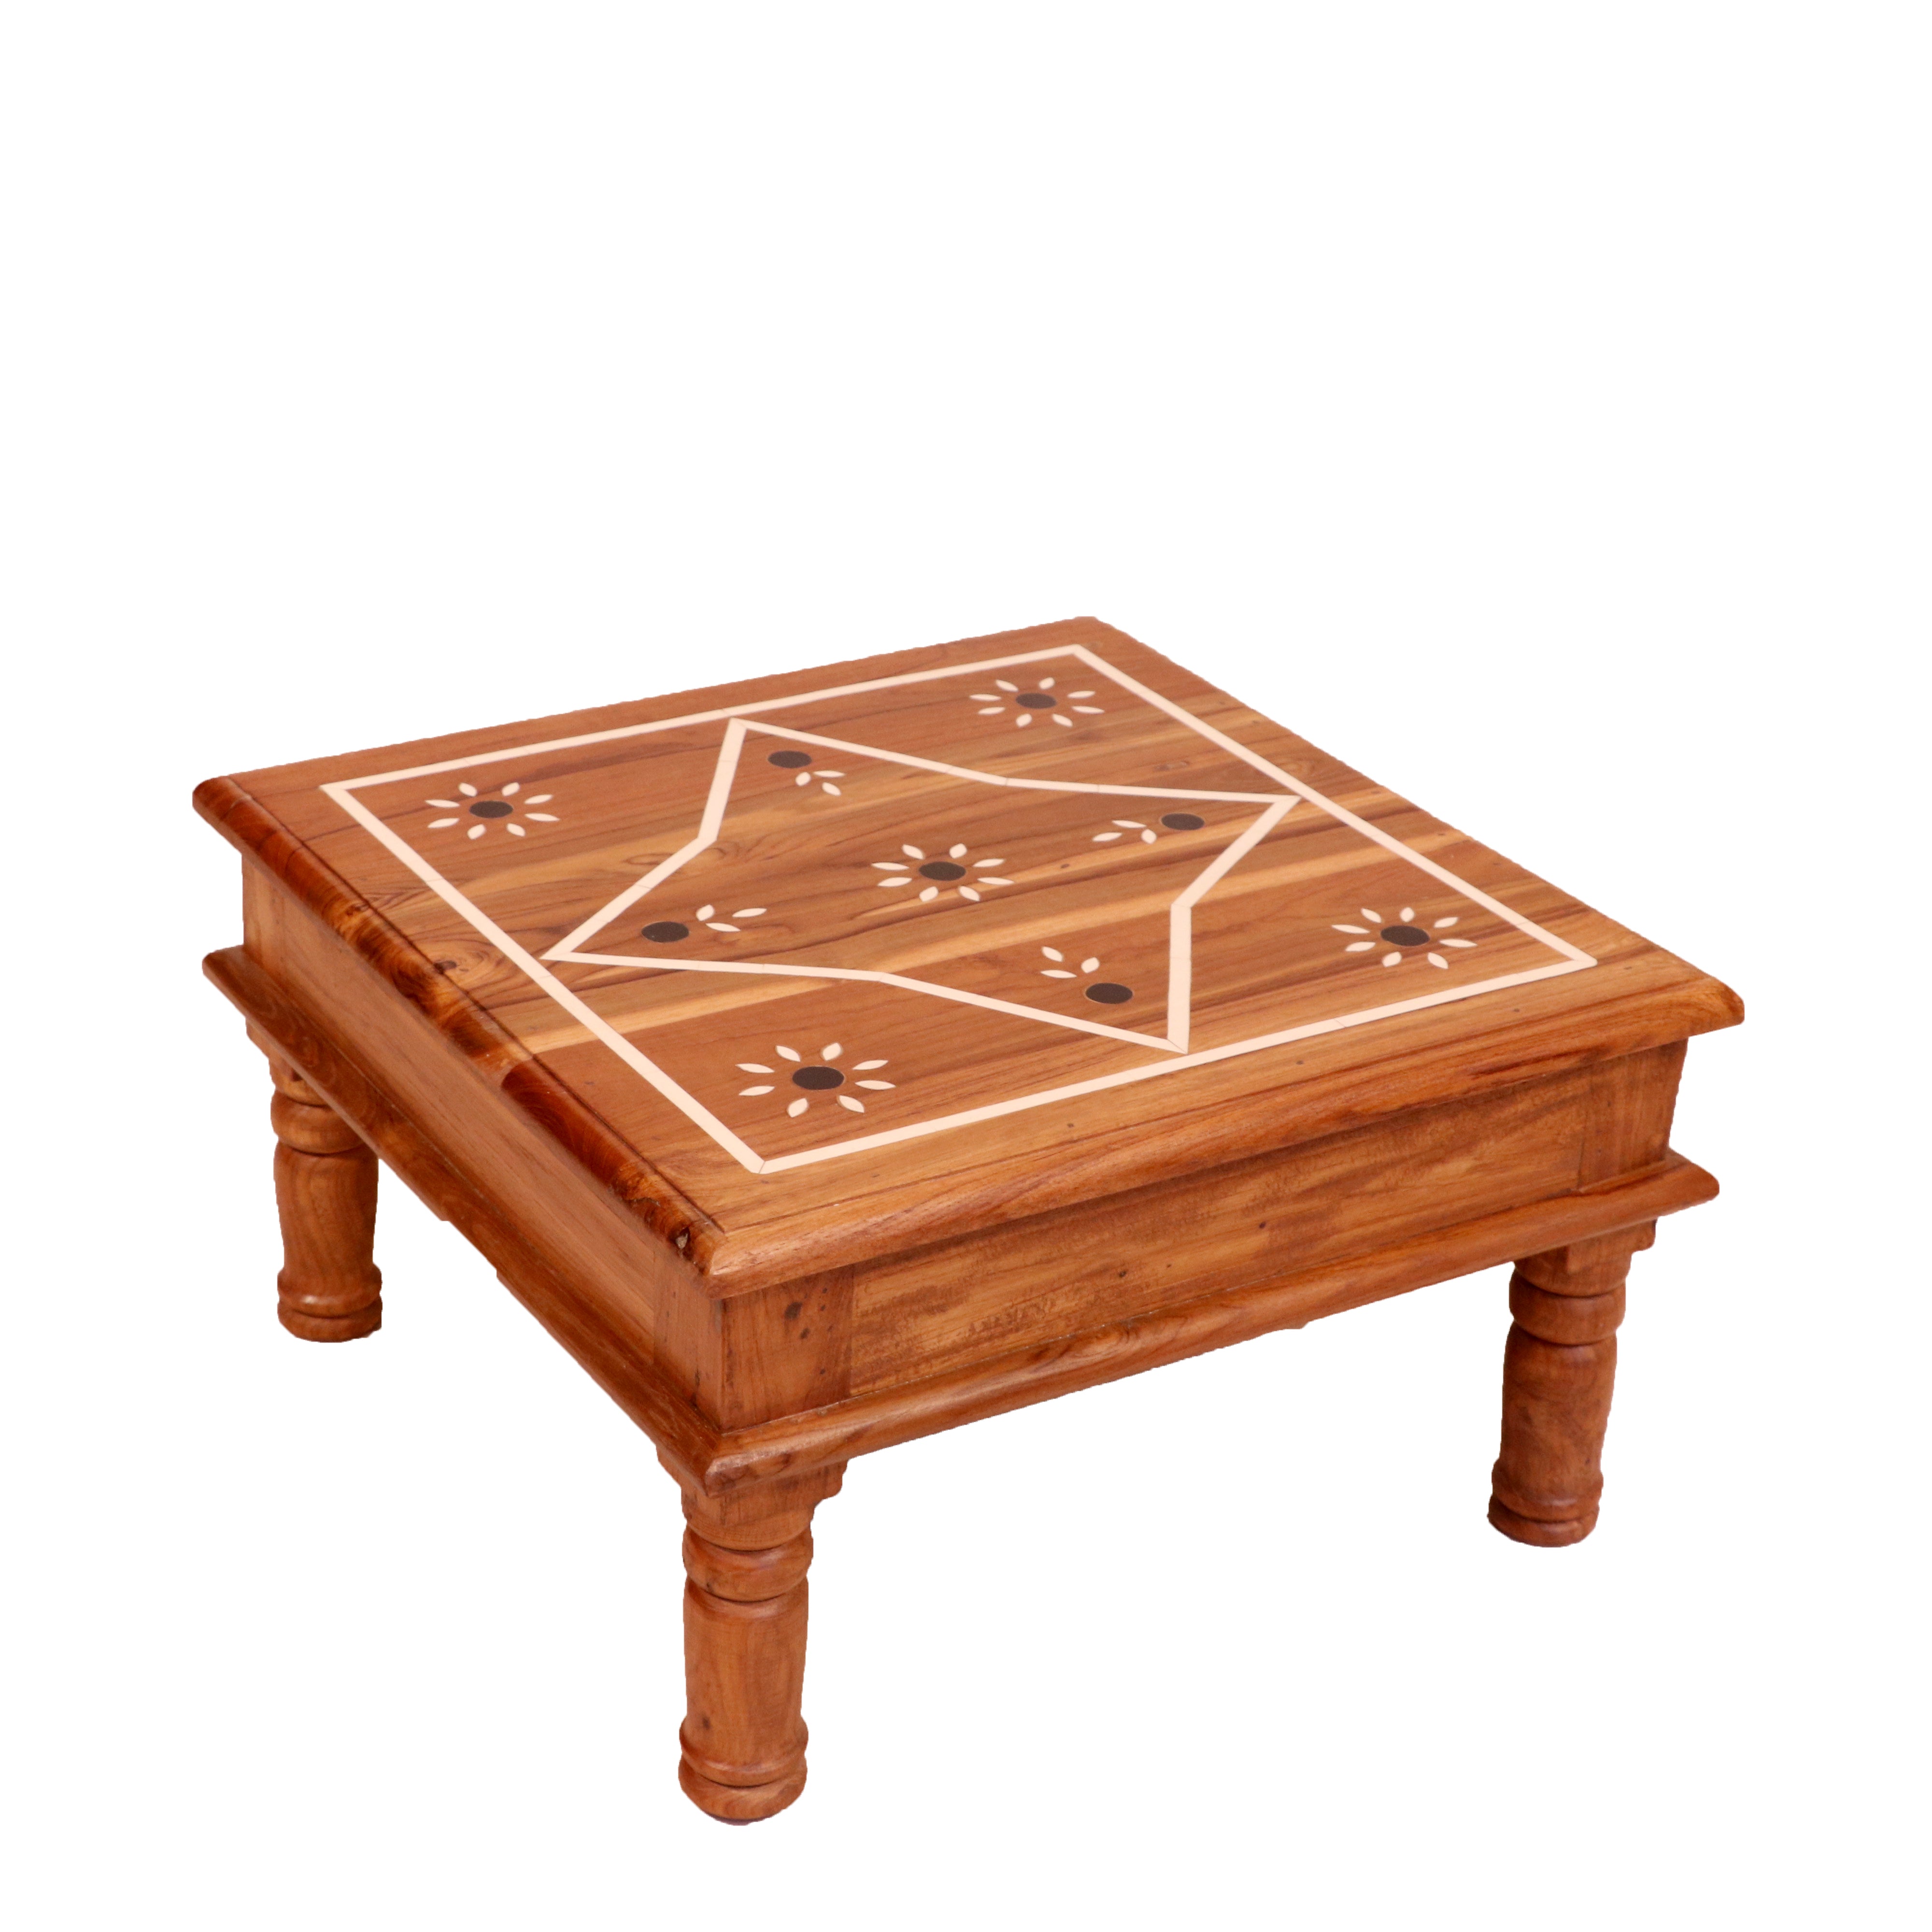 Natural Mankind Style Inlay Designed Handmade Wooden Bajot for Home Bajot